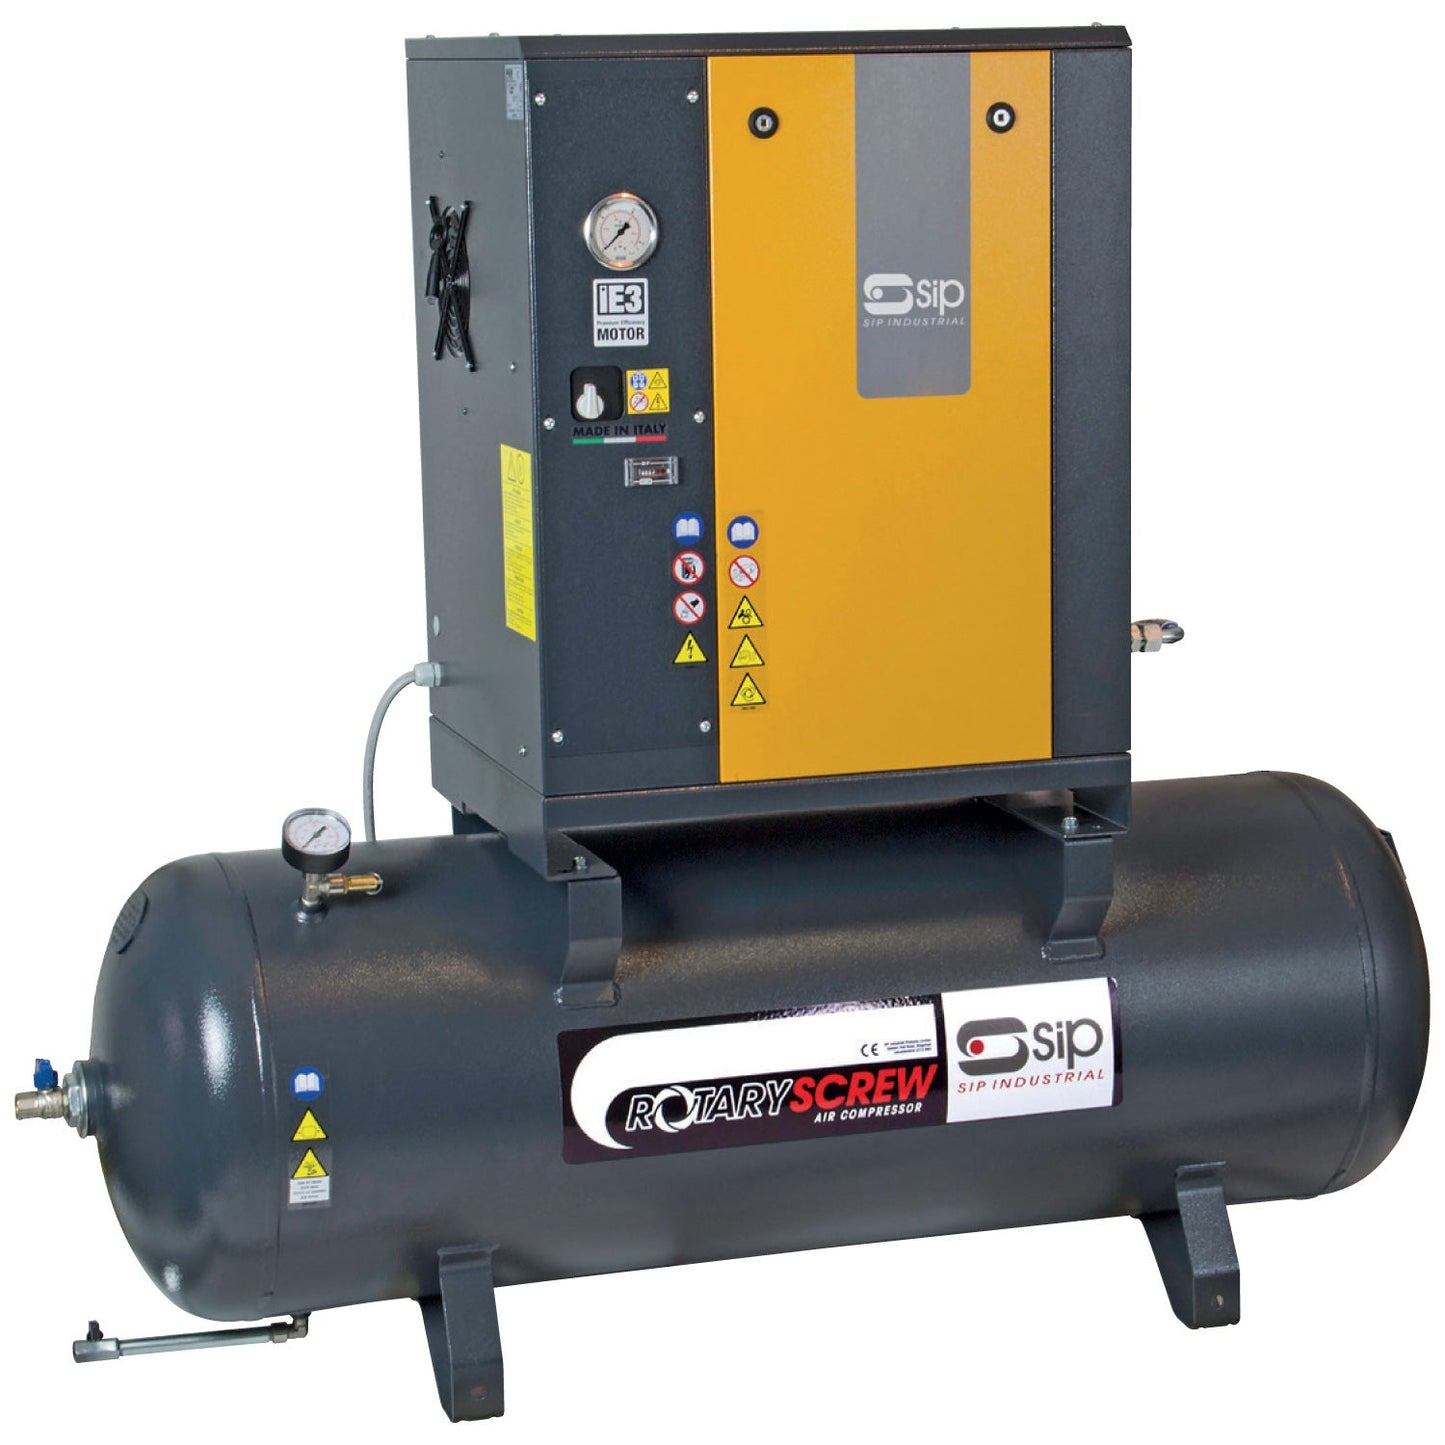 SIP RS4.0-10-200BD 200ltr Rotary Screw Compressor, Sip Industrial